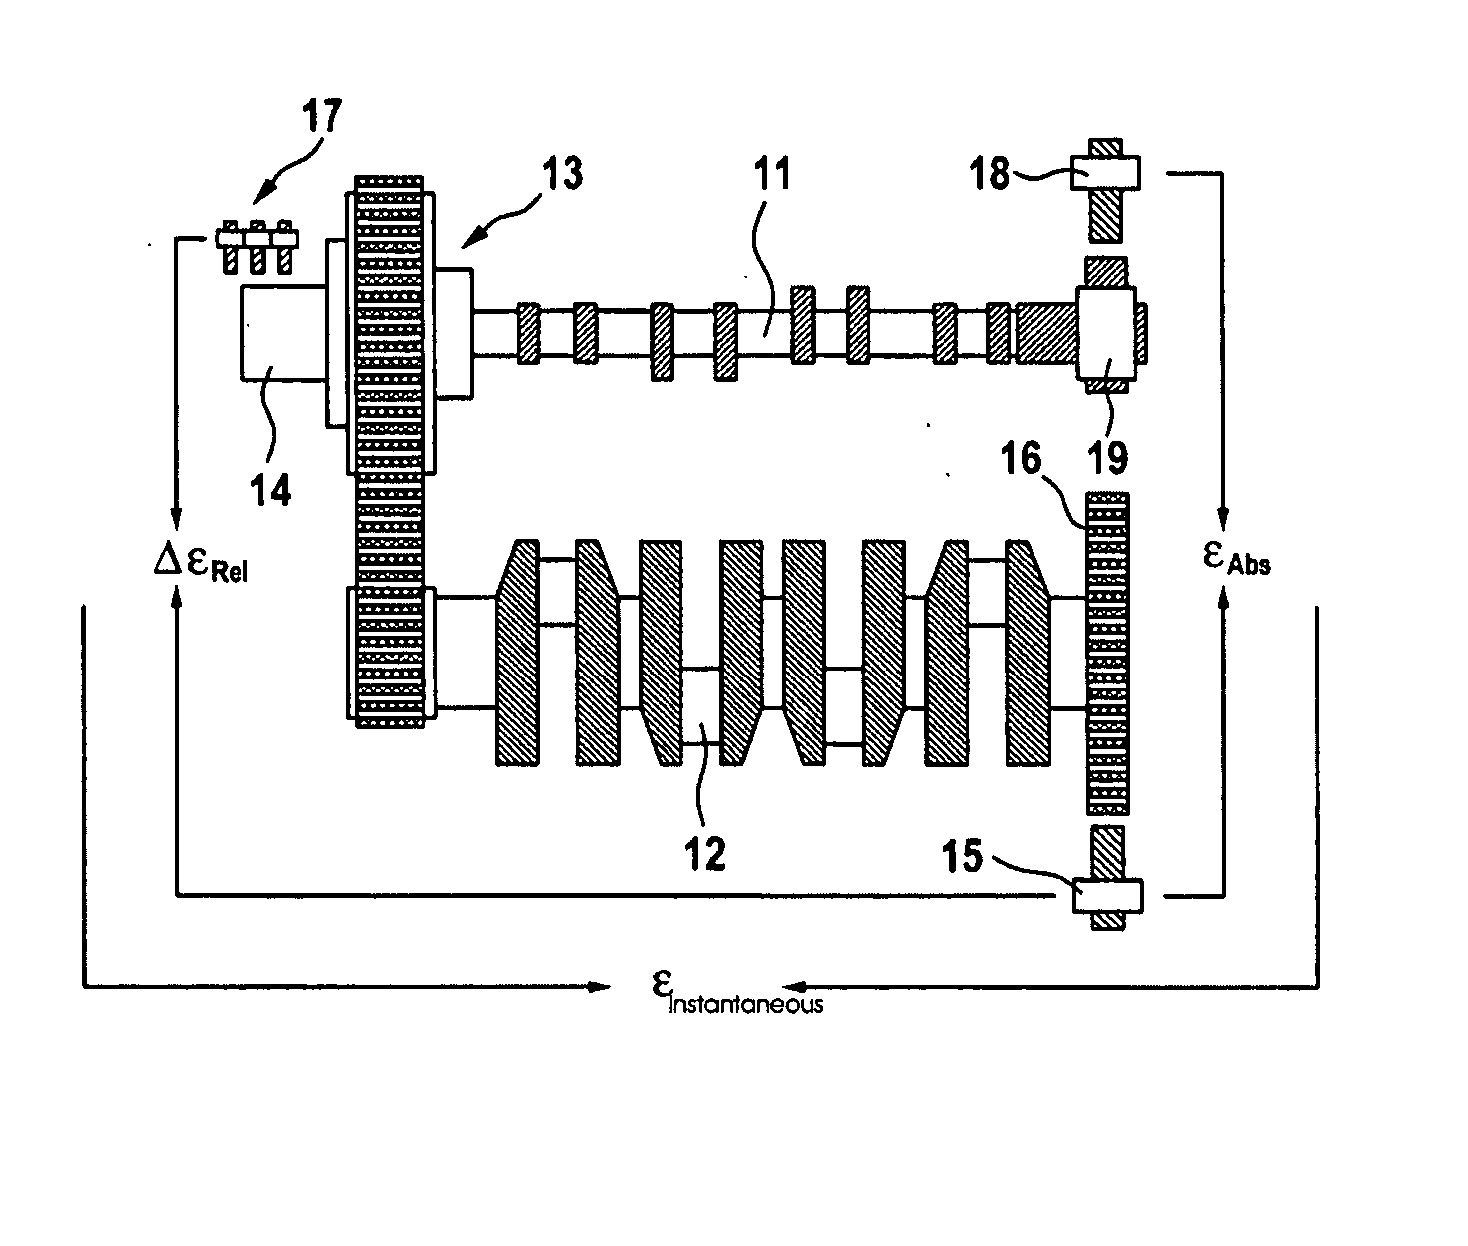 Method for determining the rotation angle position of the camshaft of a reciprocating-piston engine in relation to the crankshaft